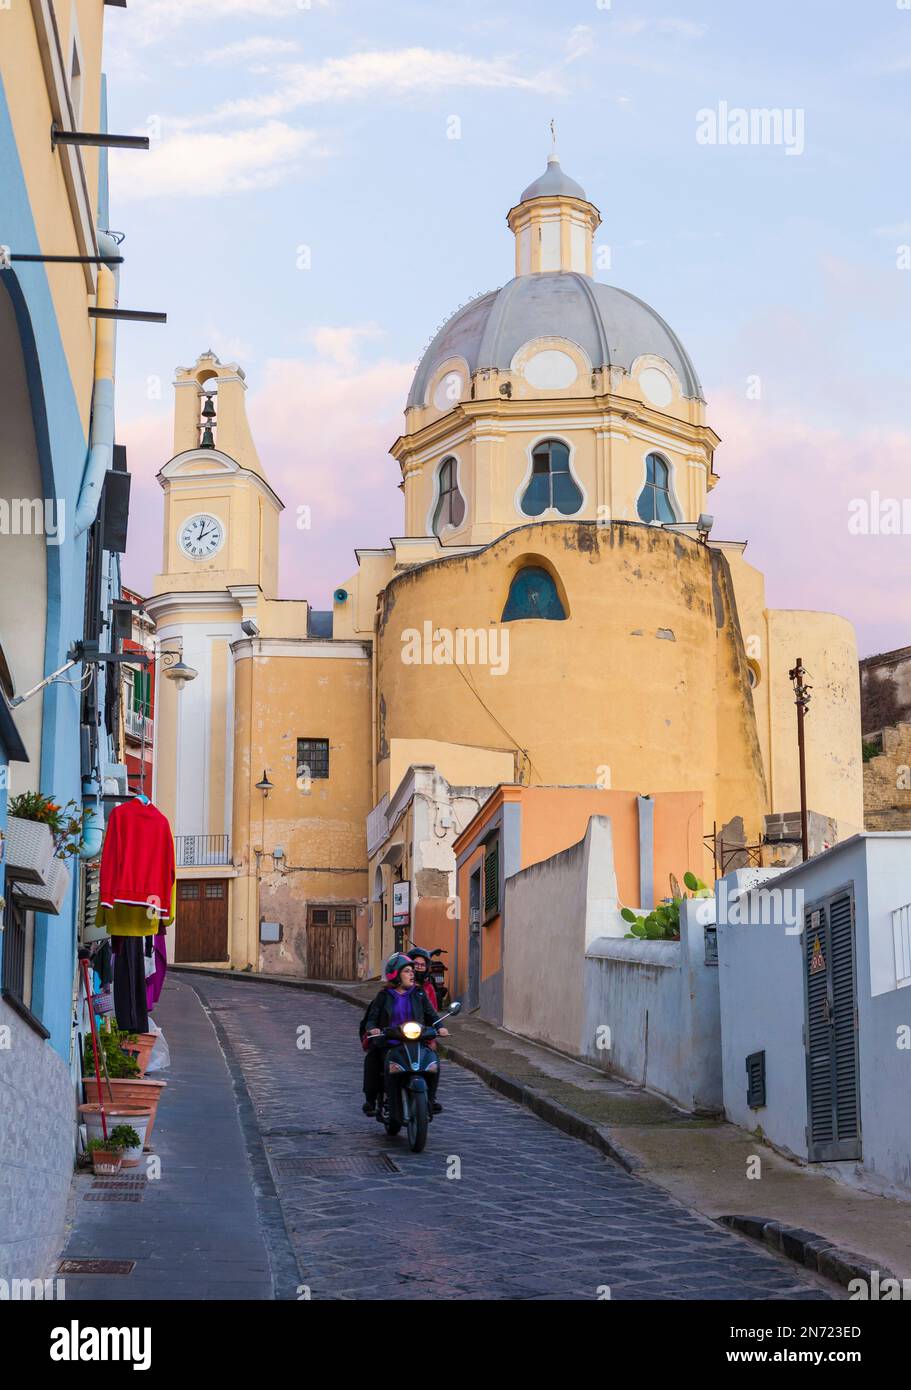 A motor scooter drives down the street San Rocco in the early evening. In the background against pastel sky the church Santiario S. Maria delle Grazie Incoronata. Corricella, Procida, Italy. Stock Photo